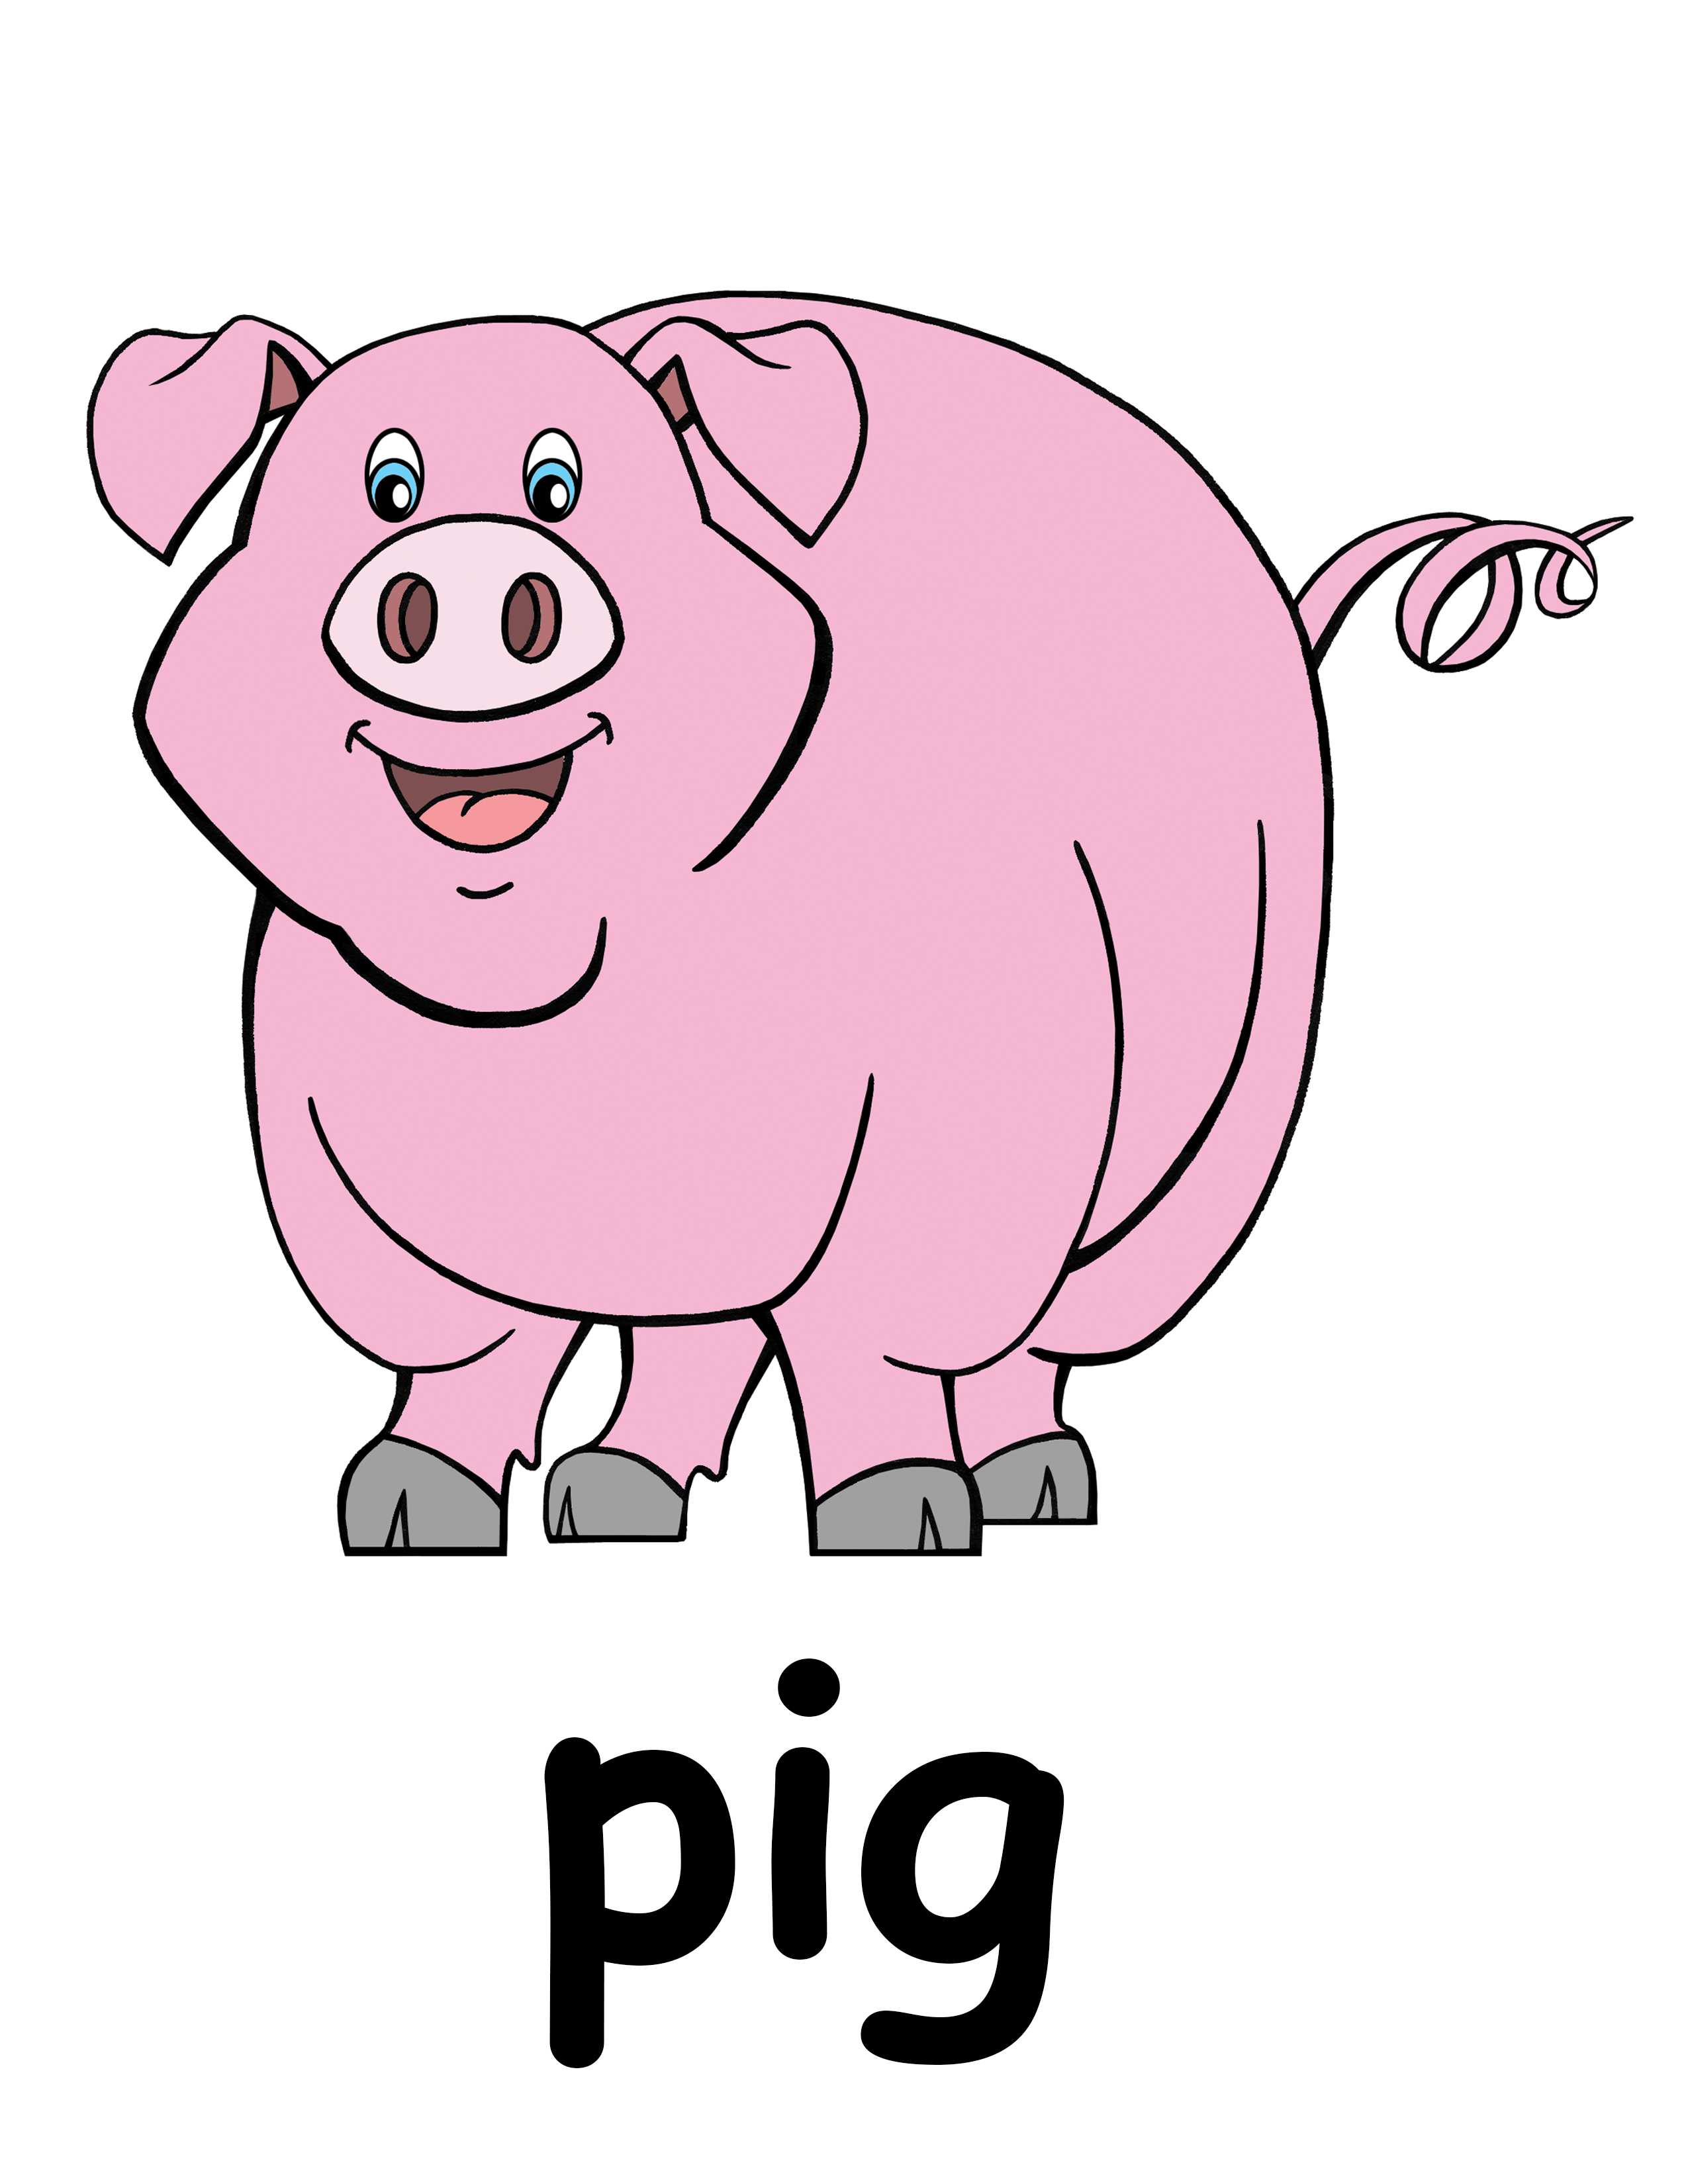 pig clipart animation - photo #33